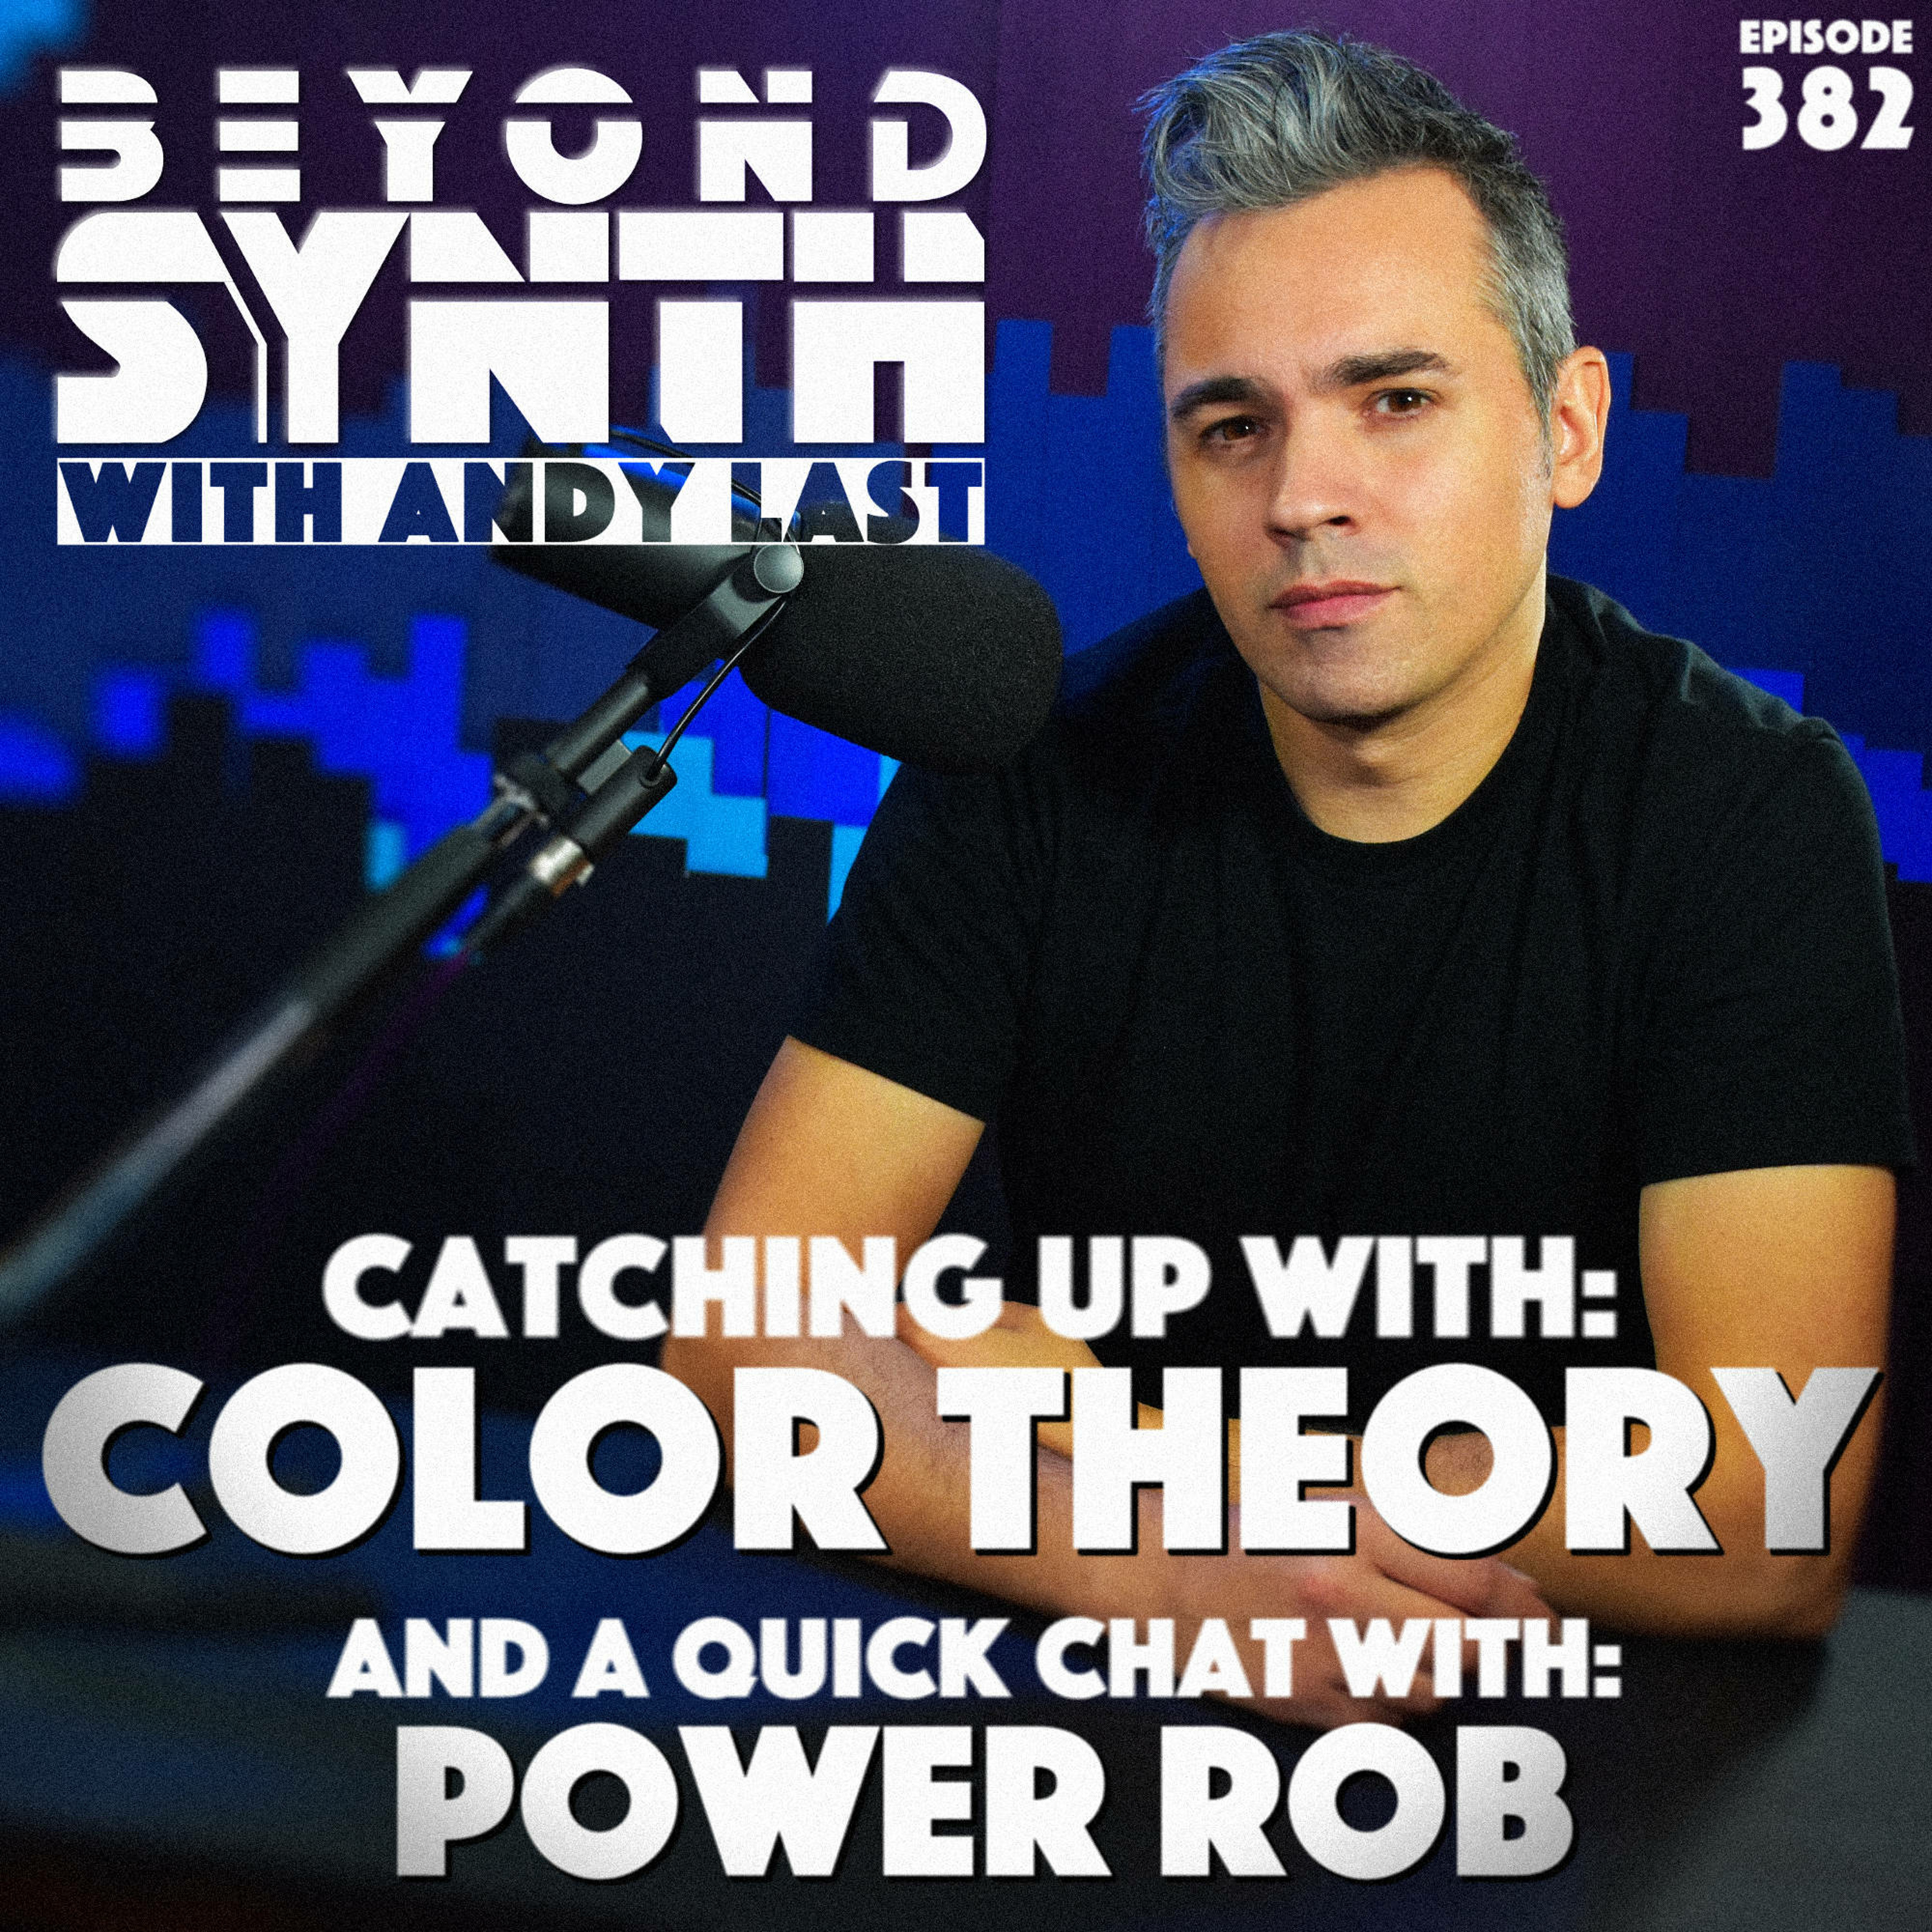 Beyond Synth - 382 - Catching Up With Color Theory / Power Rob